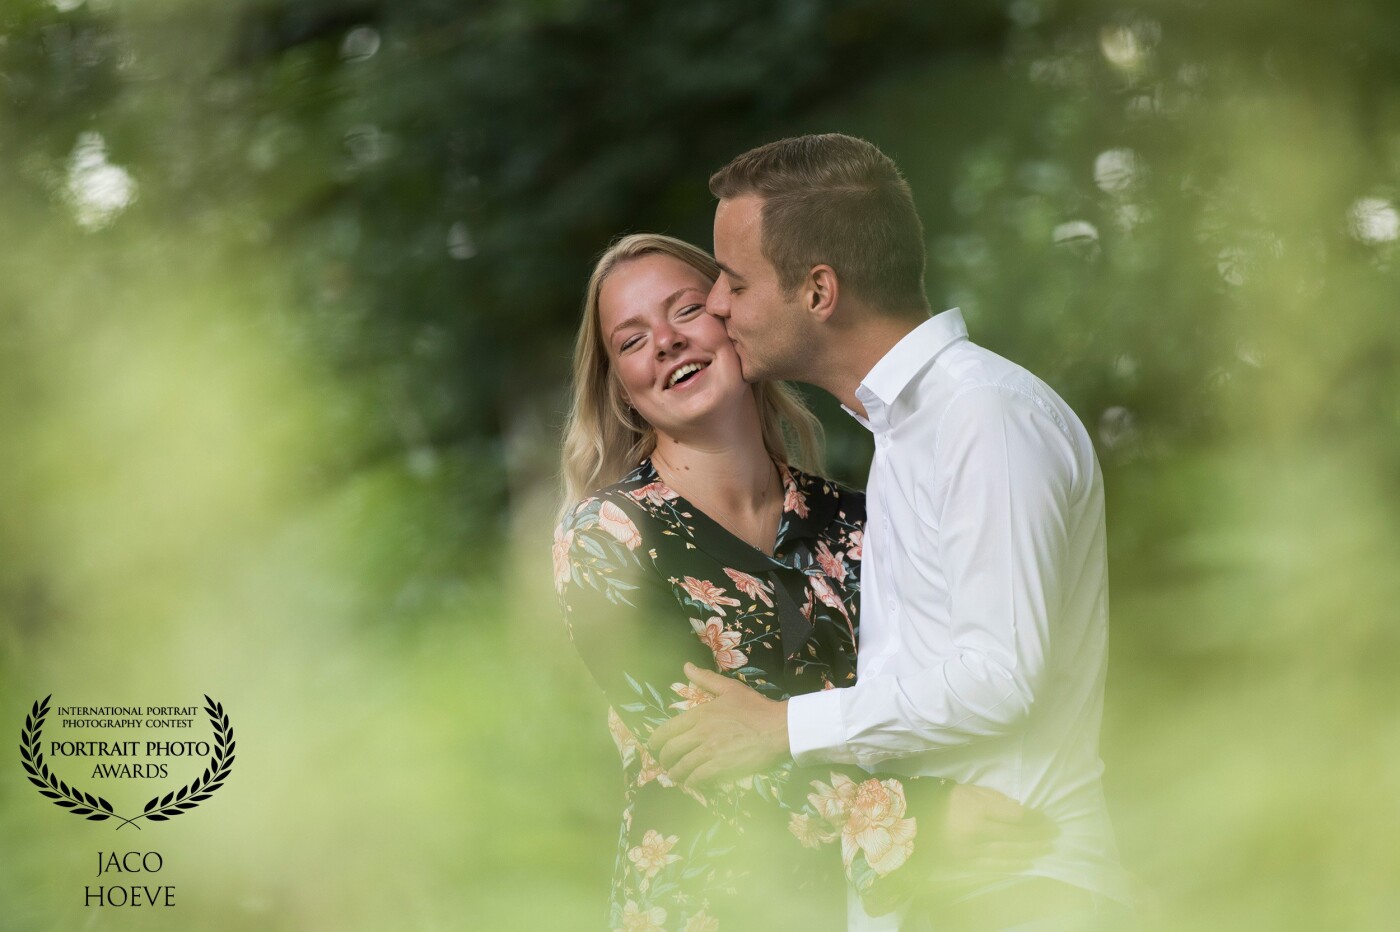 Just a love shoot during a family report! She reacts so spontaneously when her boyfriend gives her a kiss between the nice green shrubs.